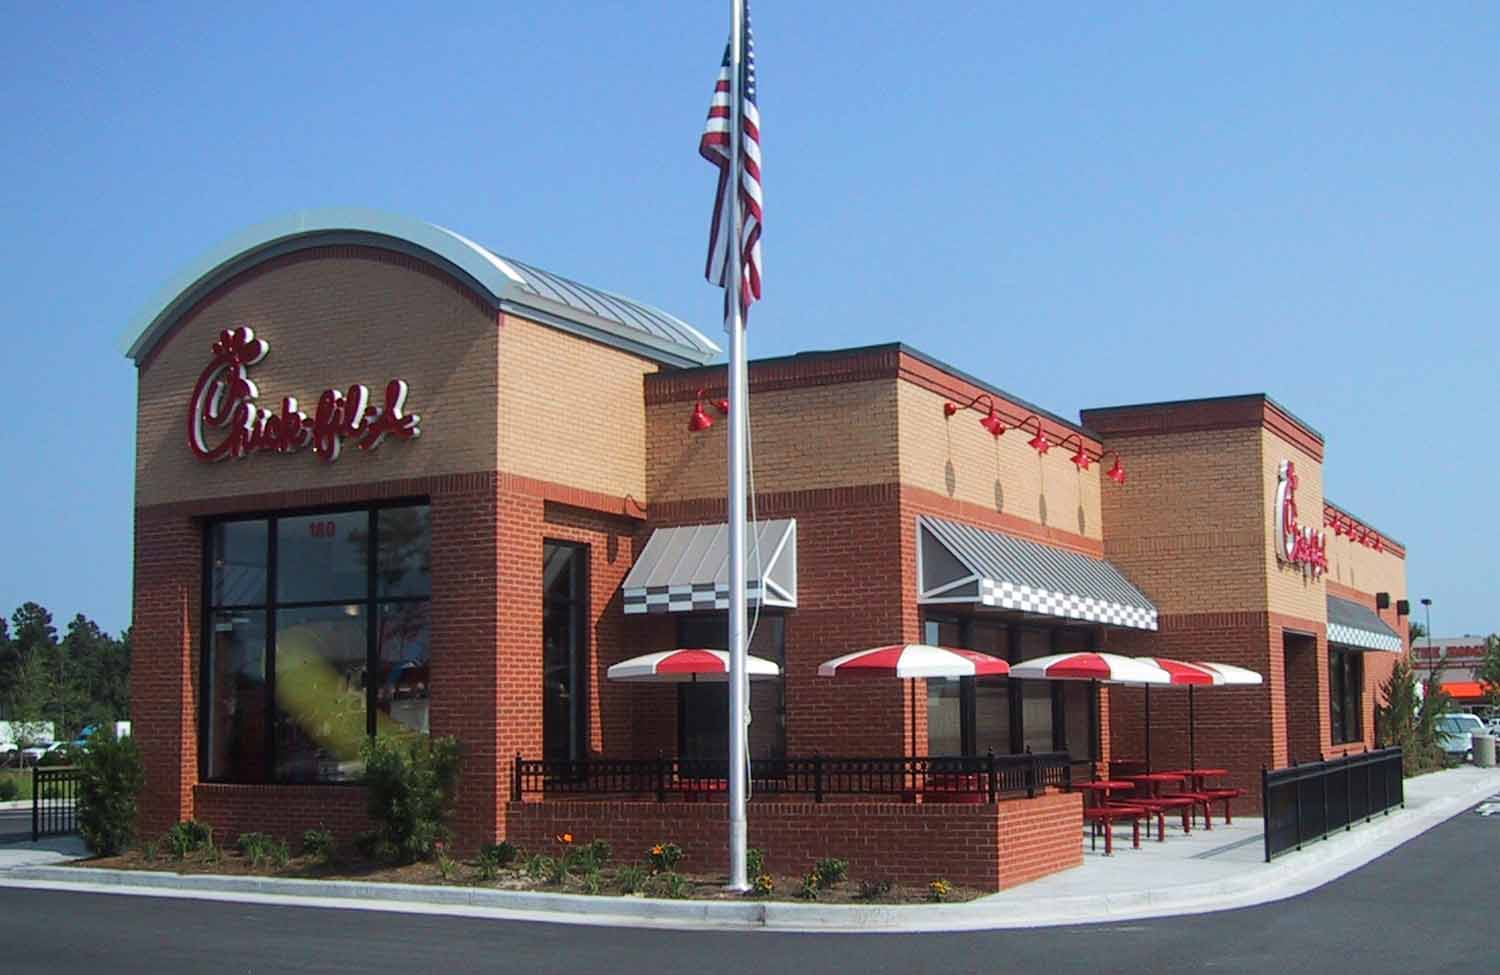 Action Alert:  Chick-Fil-A Has Said They Will No Longer Donate to “Anti-LGBT” Groups